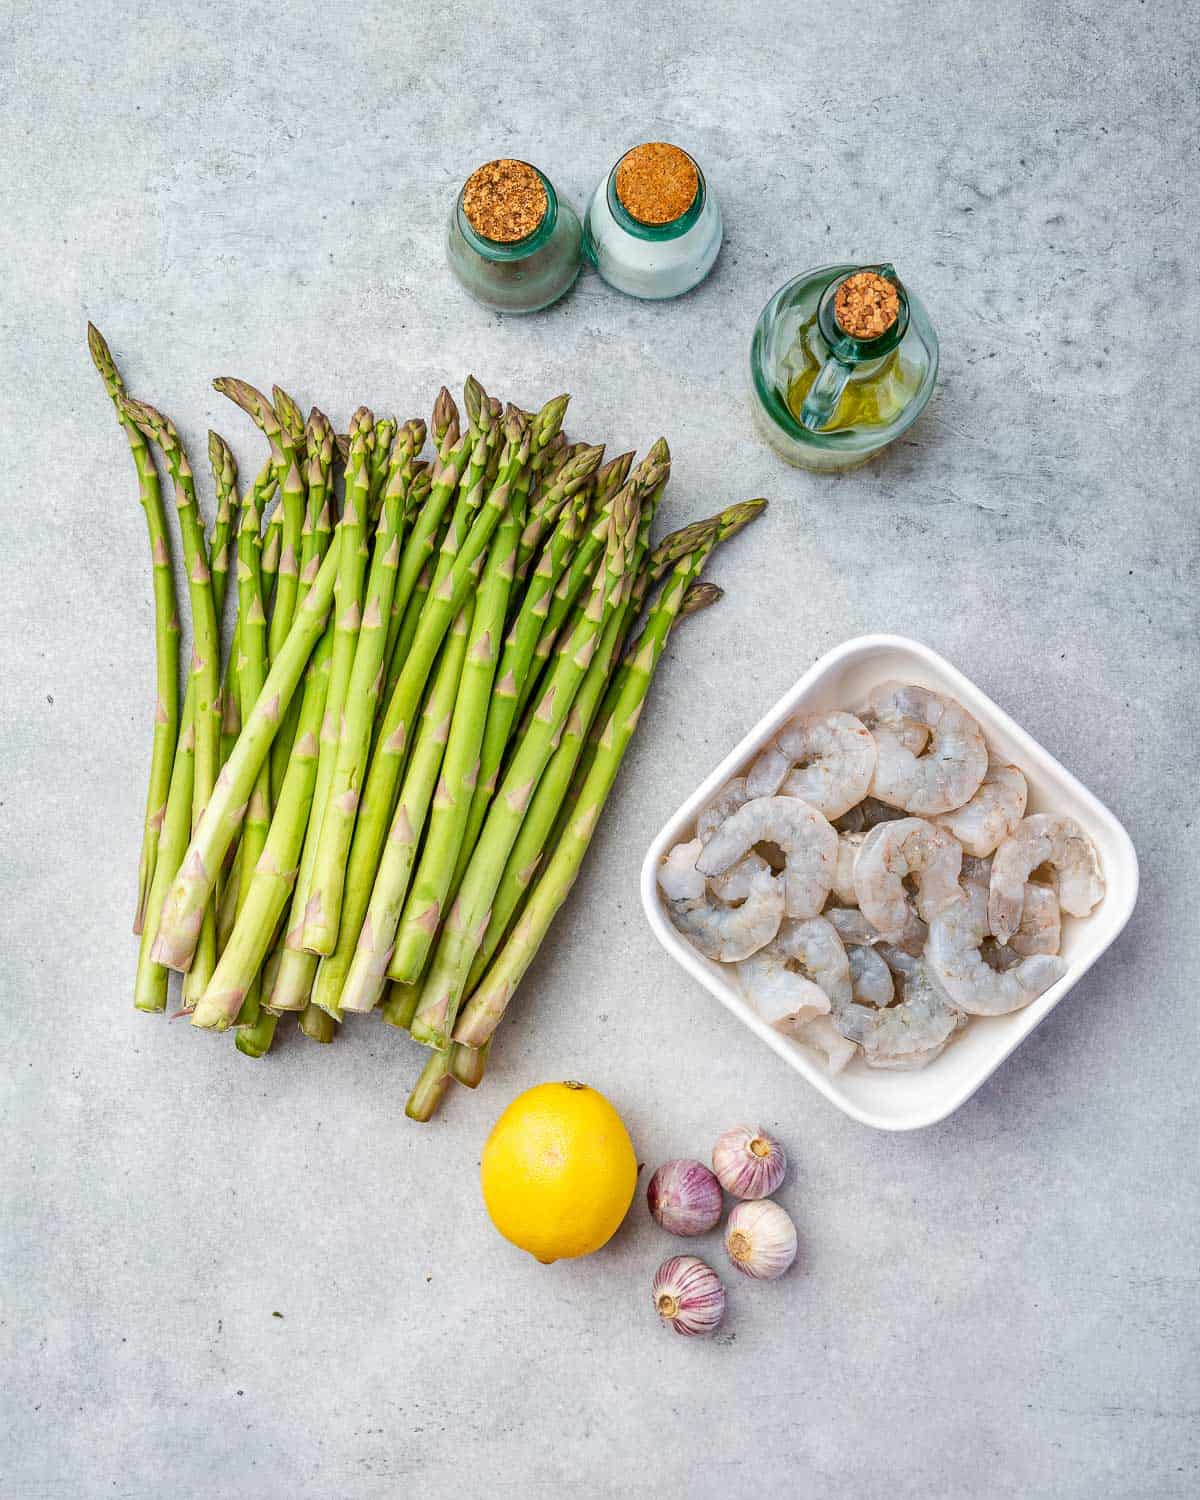 Ingredients for sheet pan shrimp and asparagus.